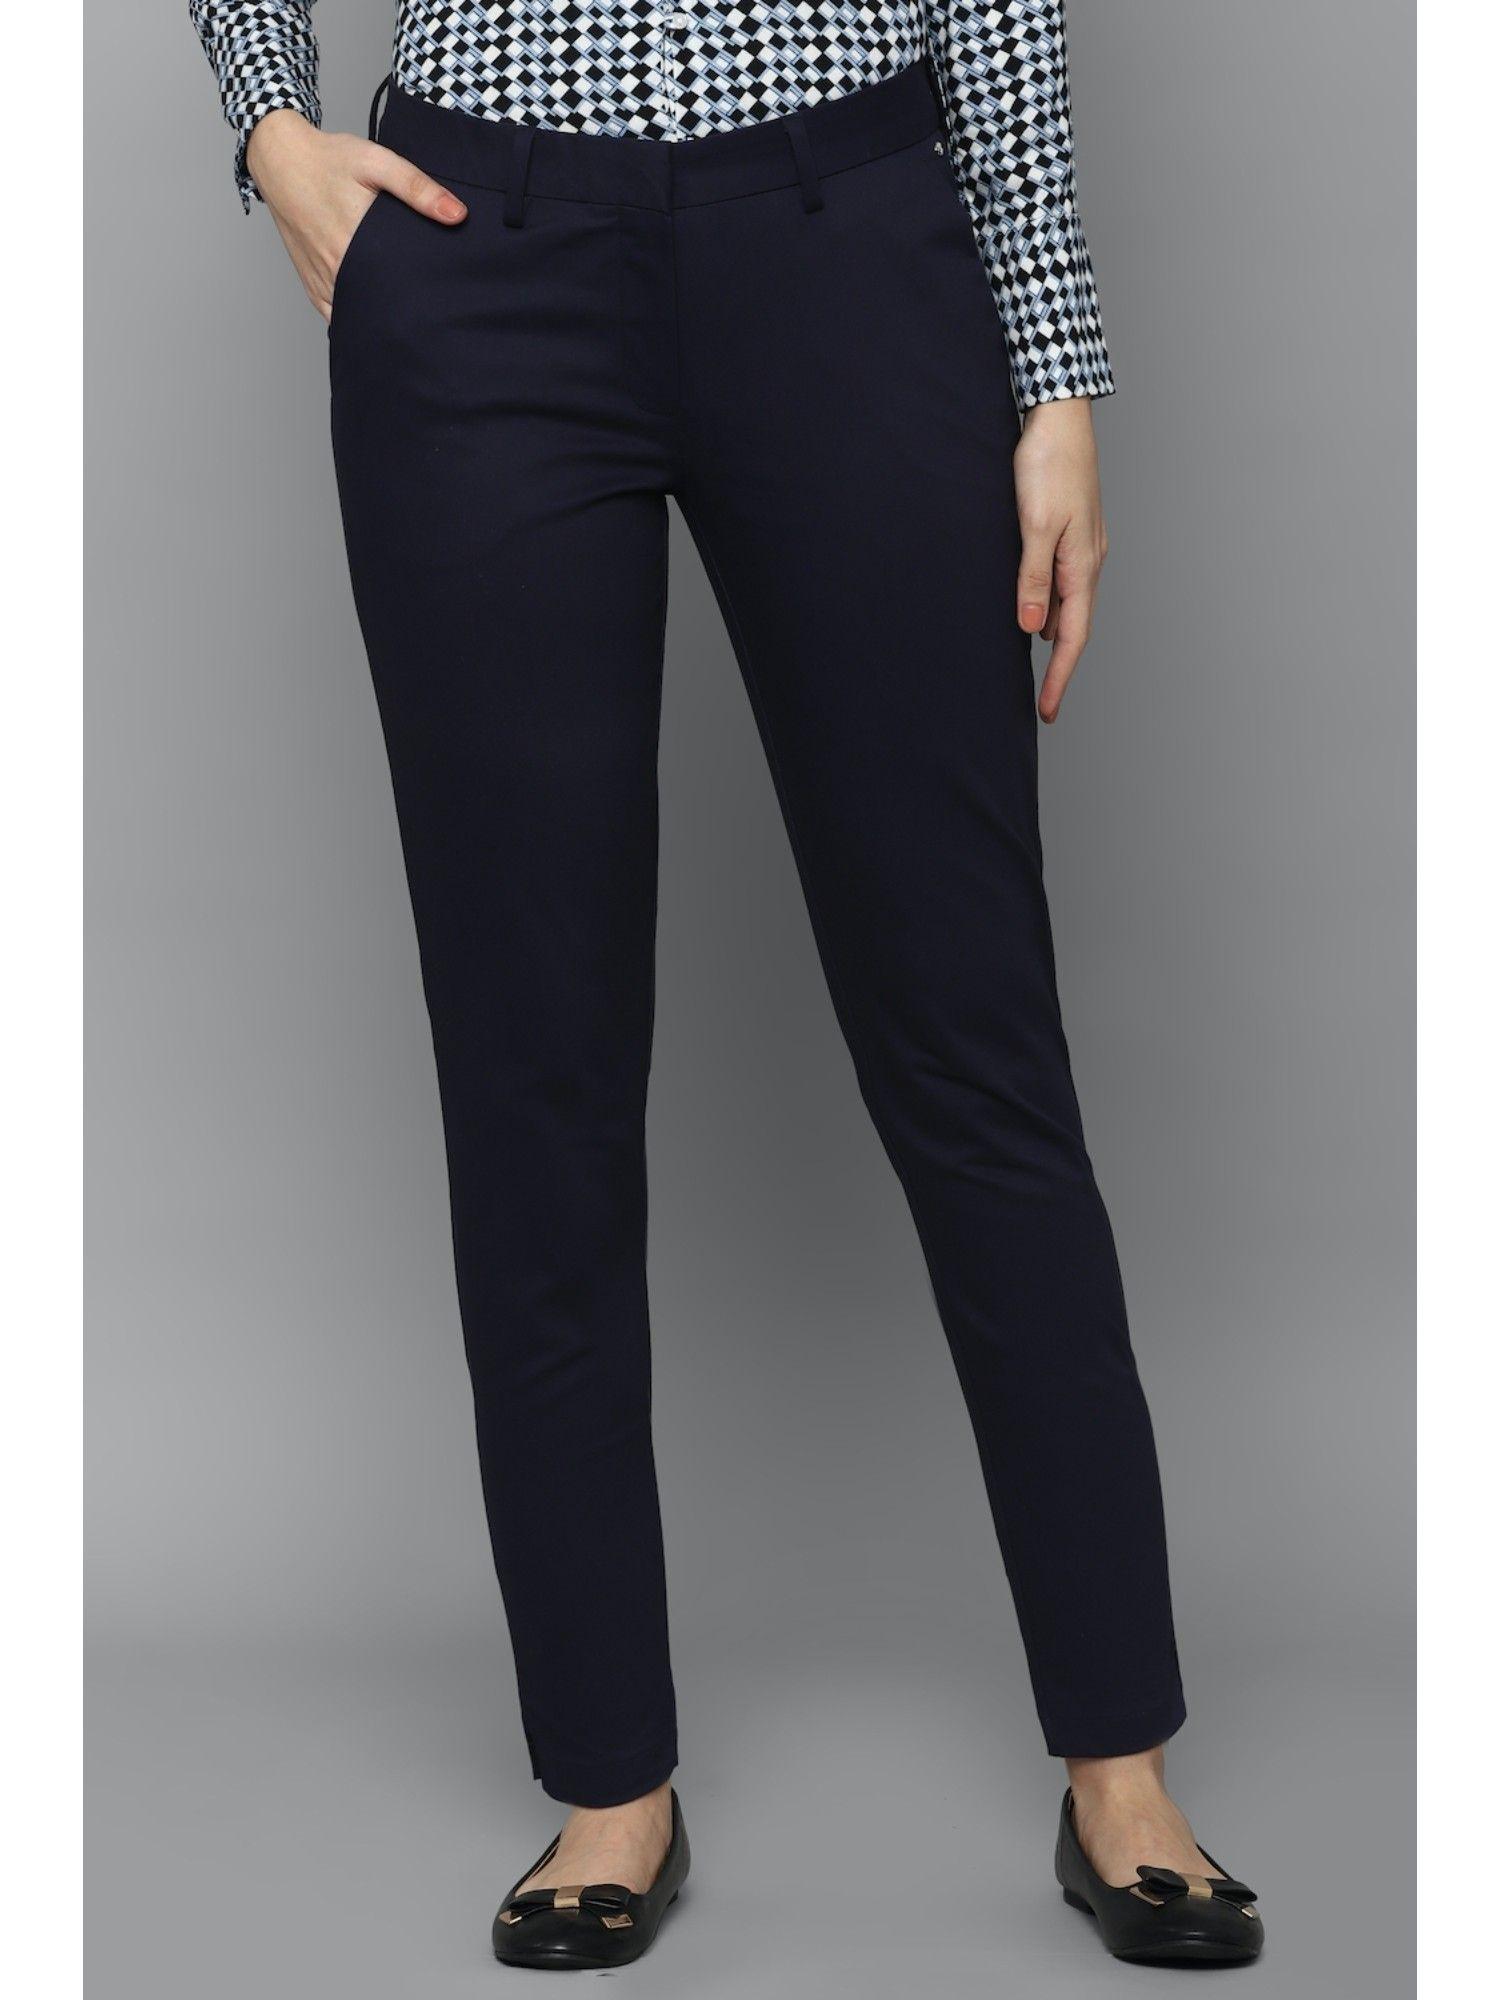 navy blue solid-plain bottoms pants and trousers